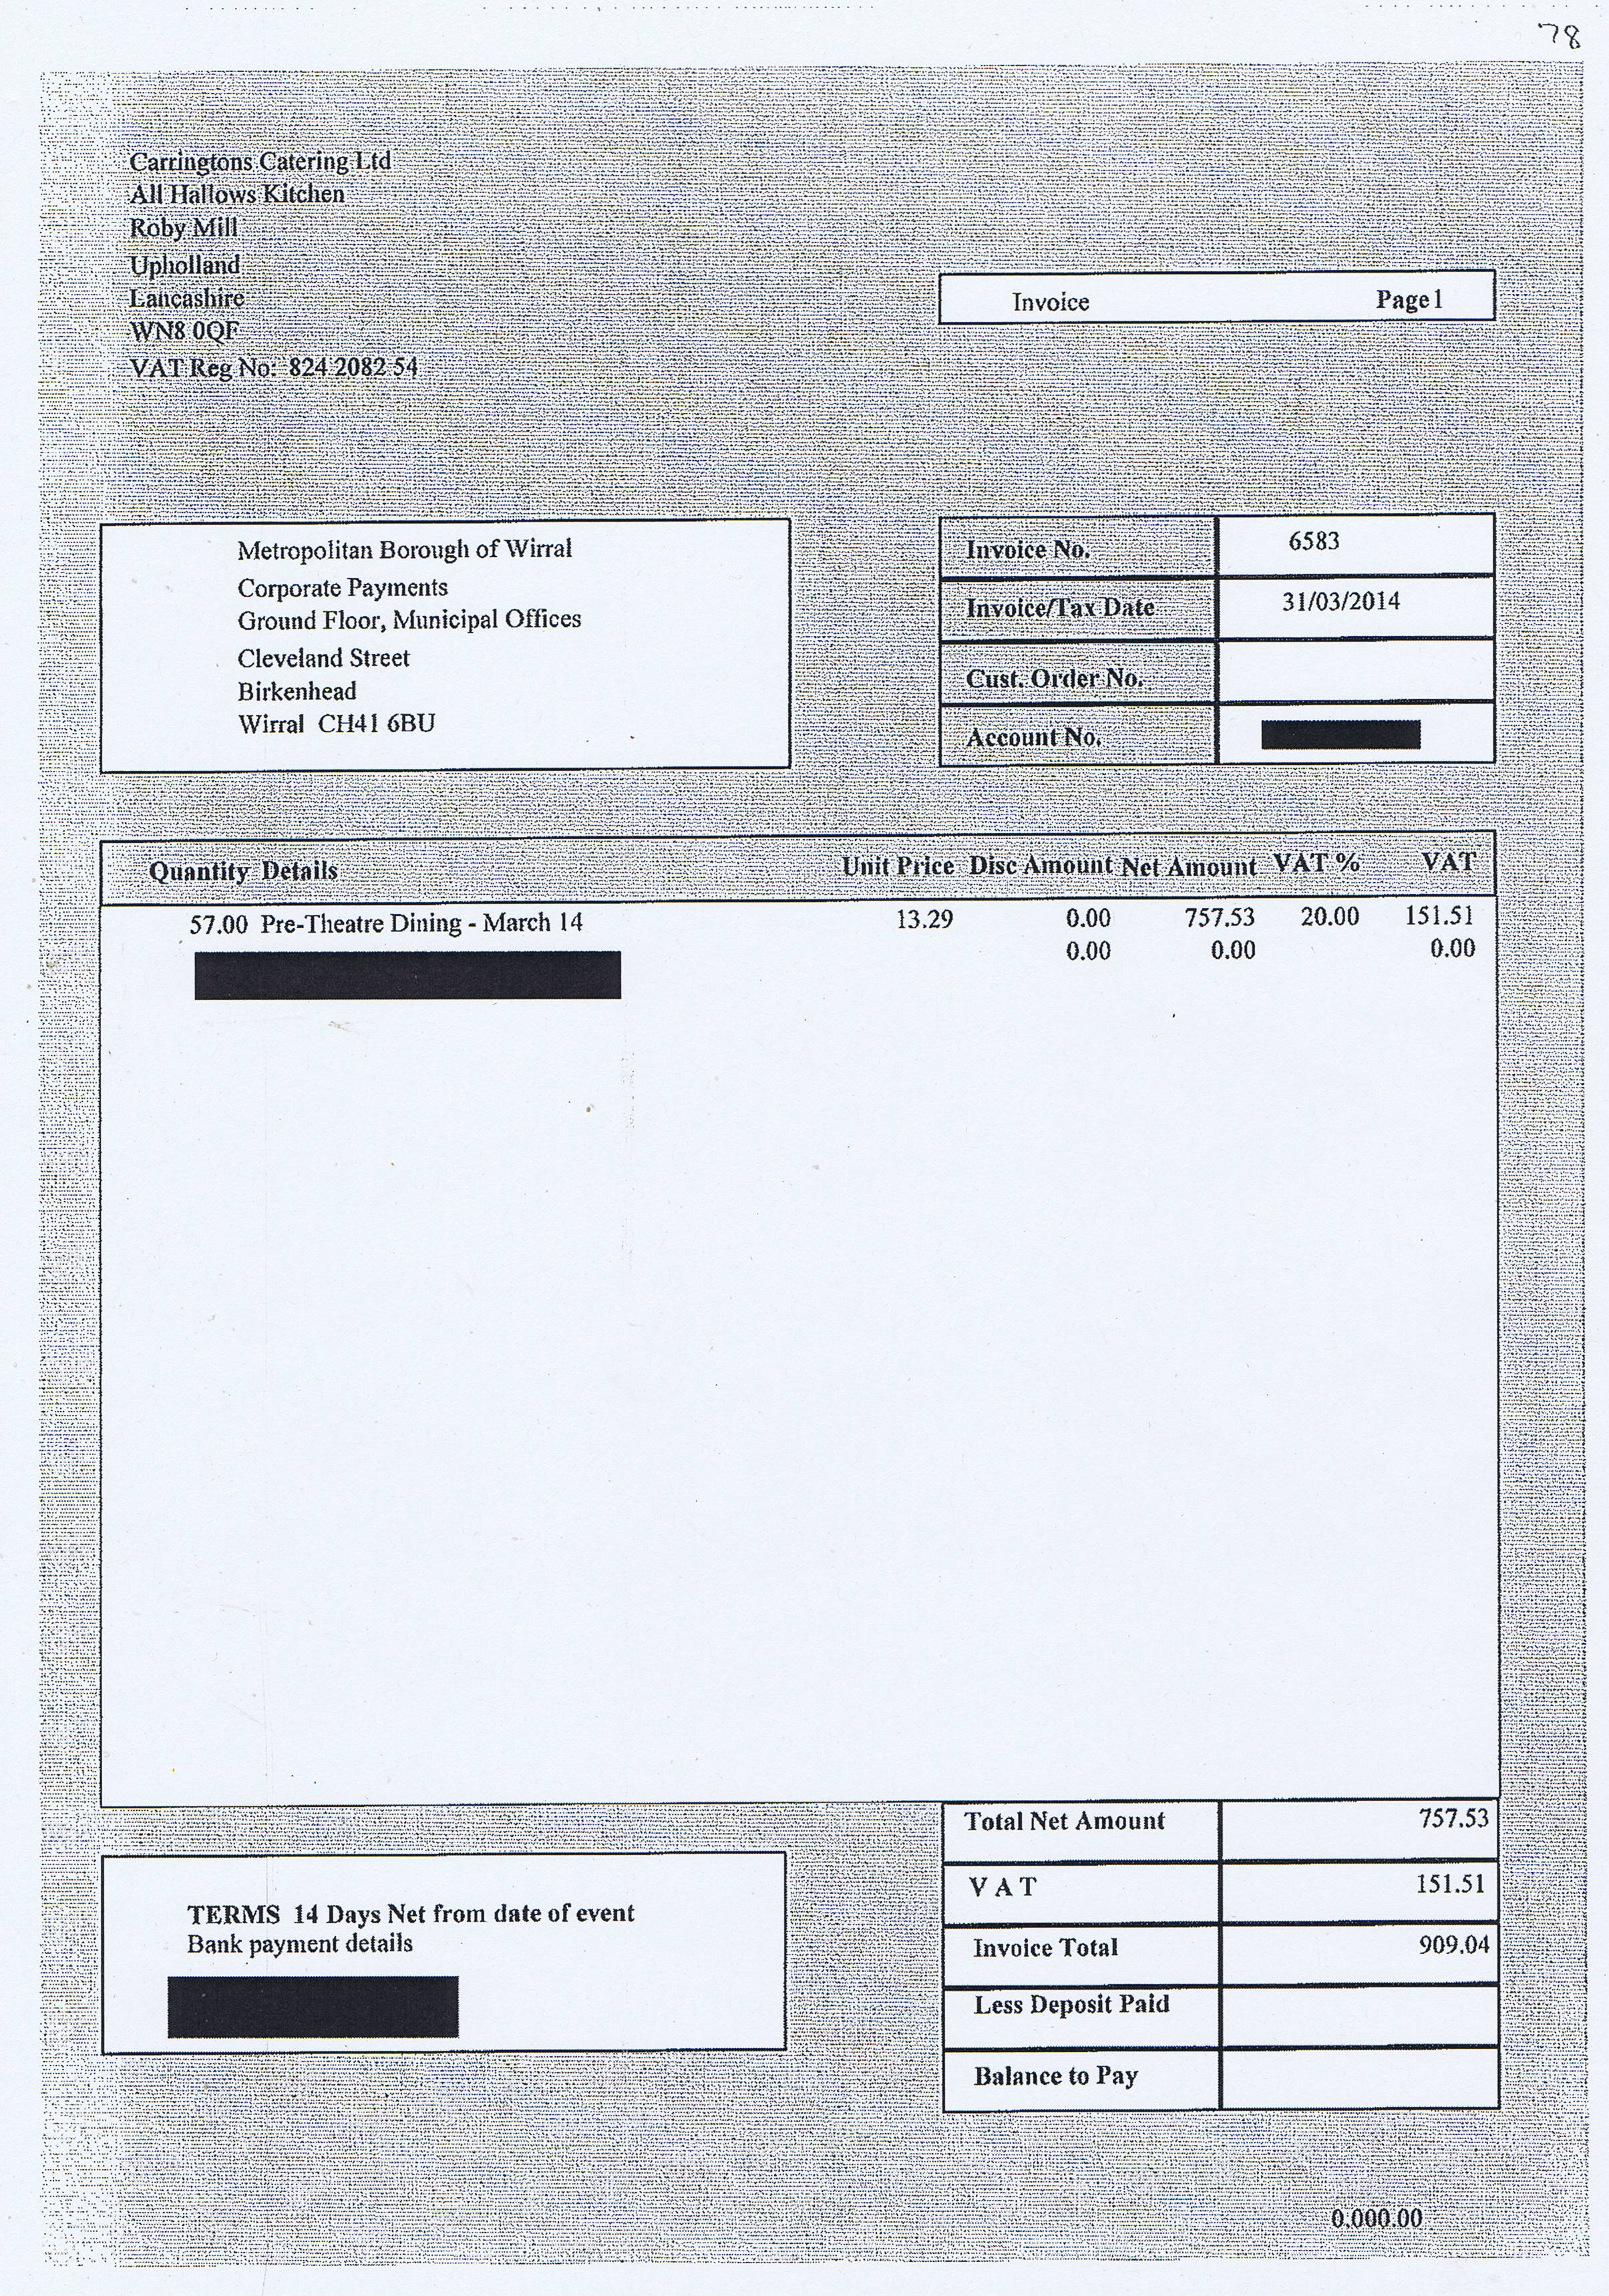 Wirral Council invoice 78 Carringtons Catering Ltd £909.04